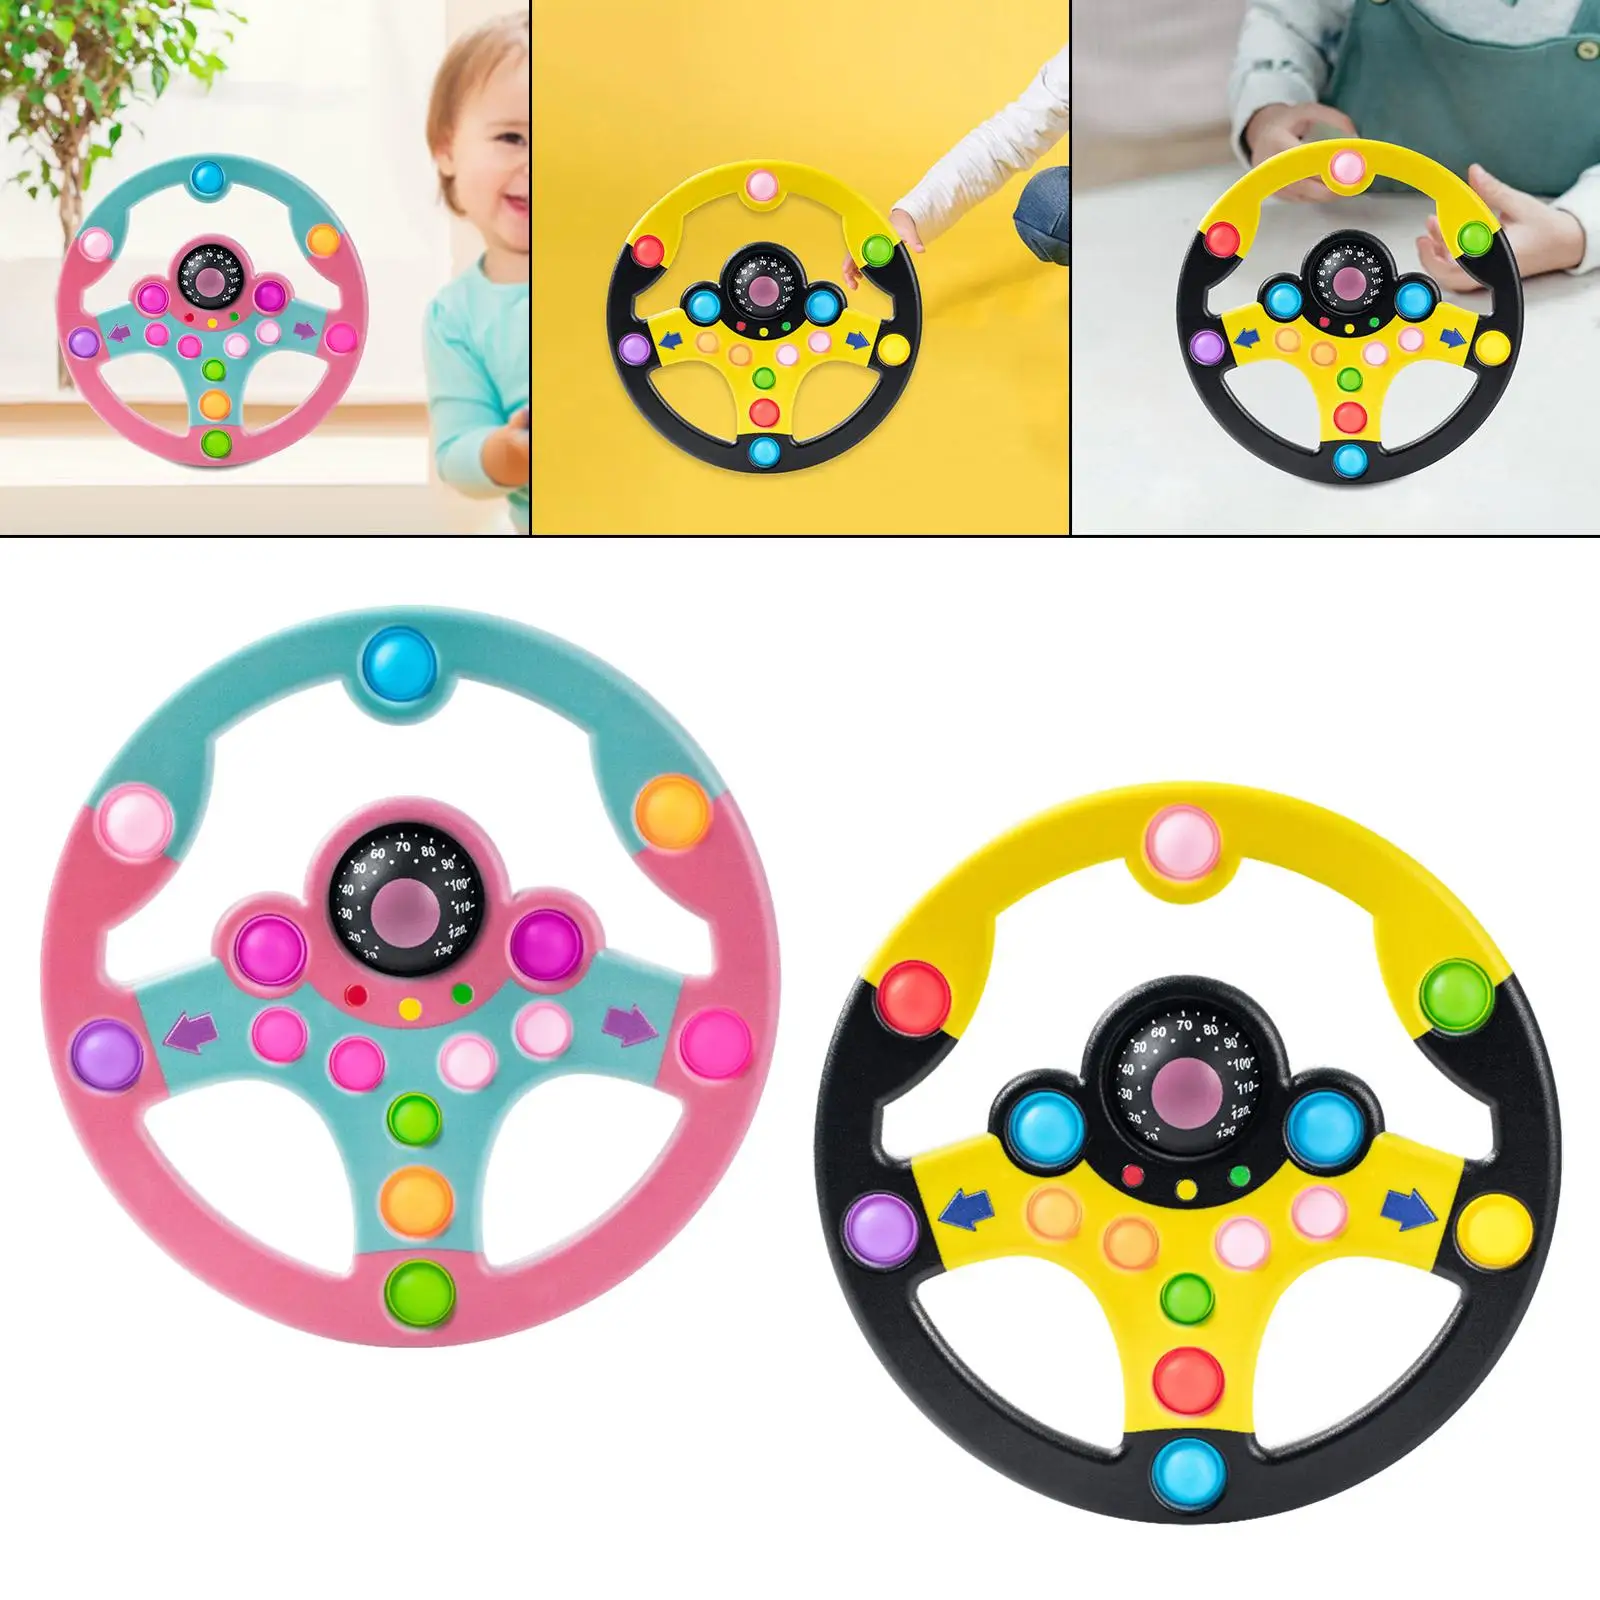 Plastic Simulation Steering Wheel Car Seat Toy,Fun Learning Toy Steering Wheel Pretend Play Toys for Children